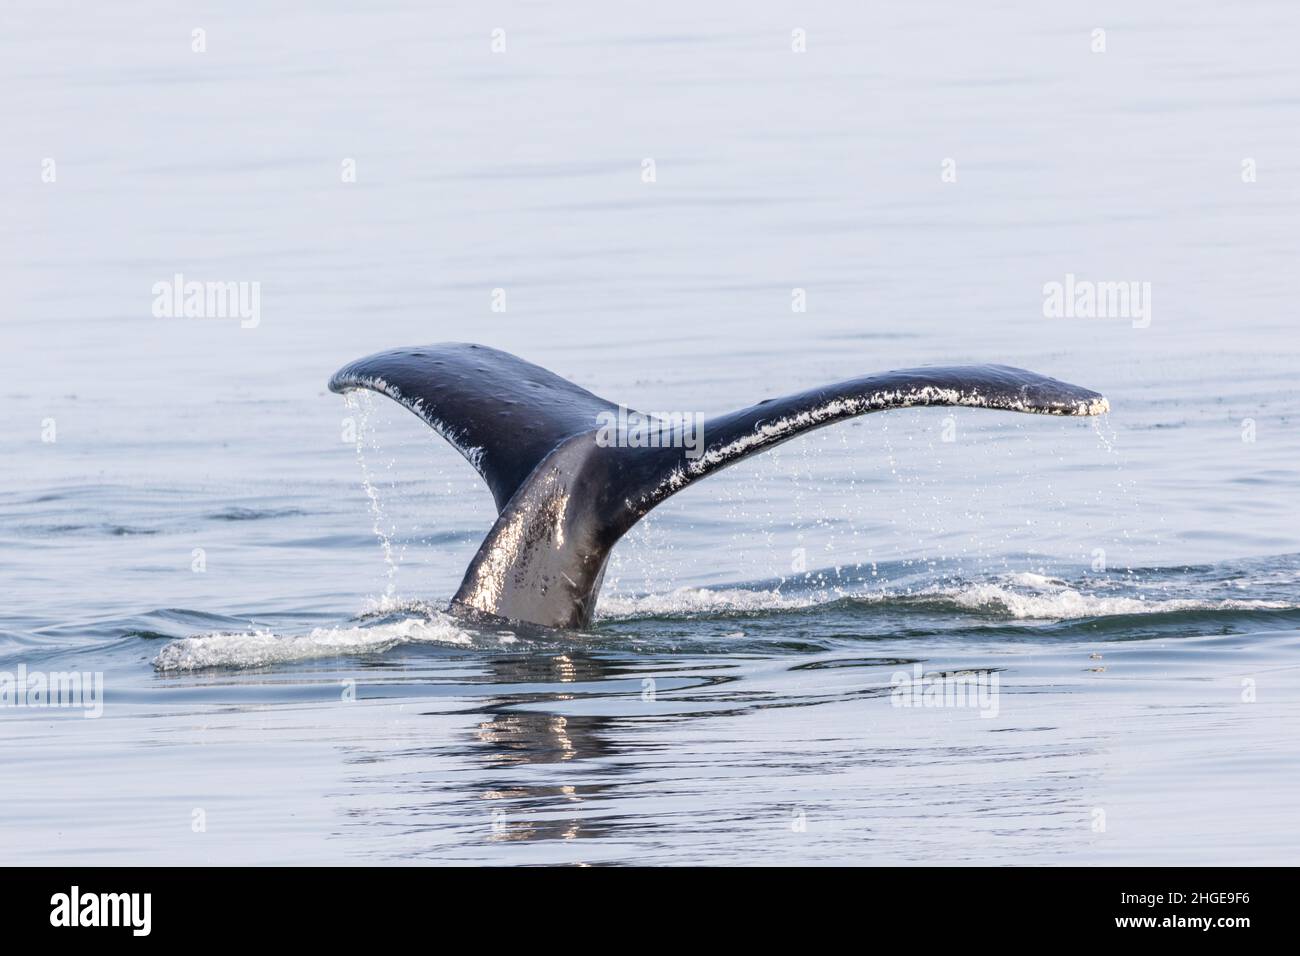 A playful humpback whale in Alaska's chilly waters raises and lowers its huge, fluked tail fi in a playful manner Stock Photo